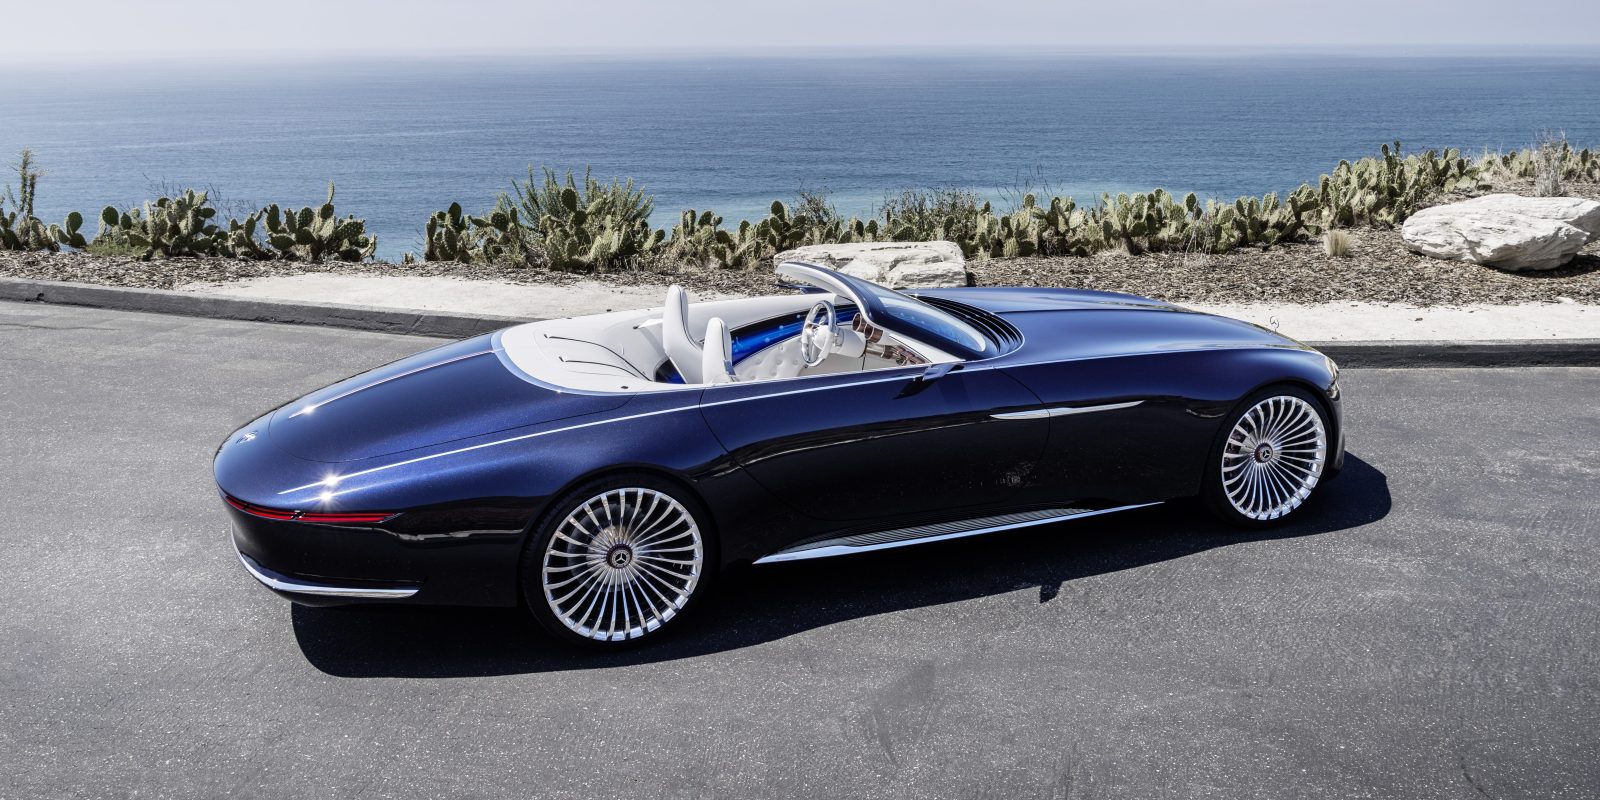 Mercedes unveils new cabriolet allelectric concept with 'over 200